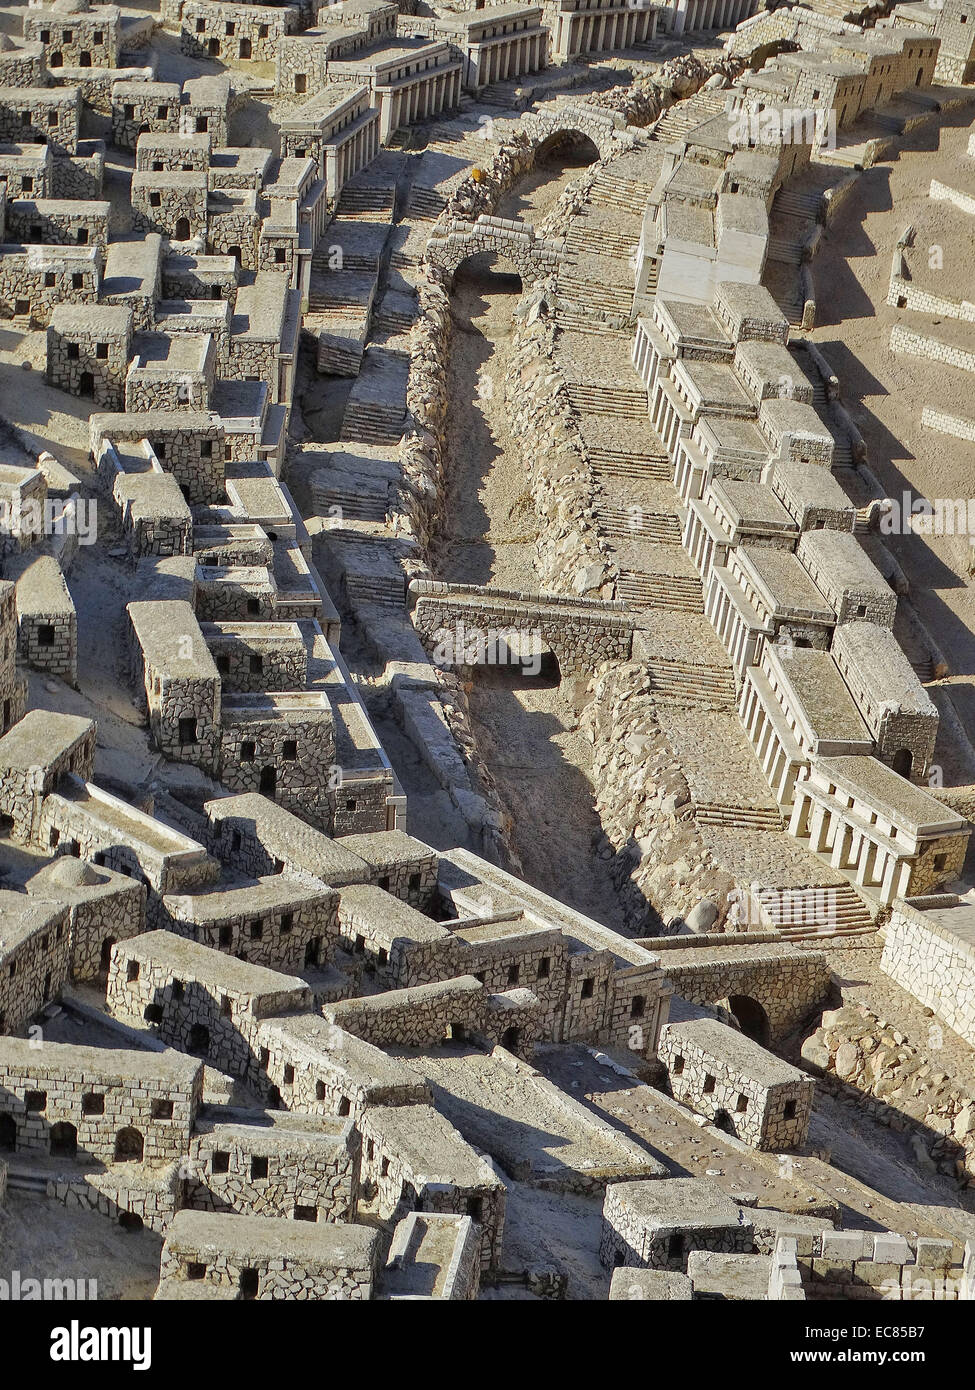 Detailed street view of the Model of Jerusalem at the Israel Museum. The Model is a 1:50 scale-model of the City of Jerusalem in the late Second Temple Period. The model was designed by Israeli historian and geographer Michael Avi Yonah based on the writings of Flavius Josephus and other historical sources. The model includes a replica of the Herodian Temple. Stock Photo